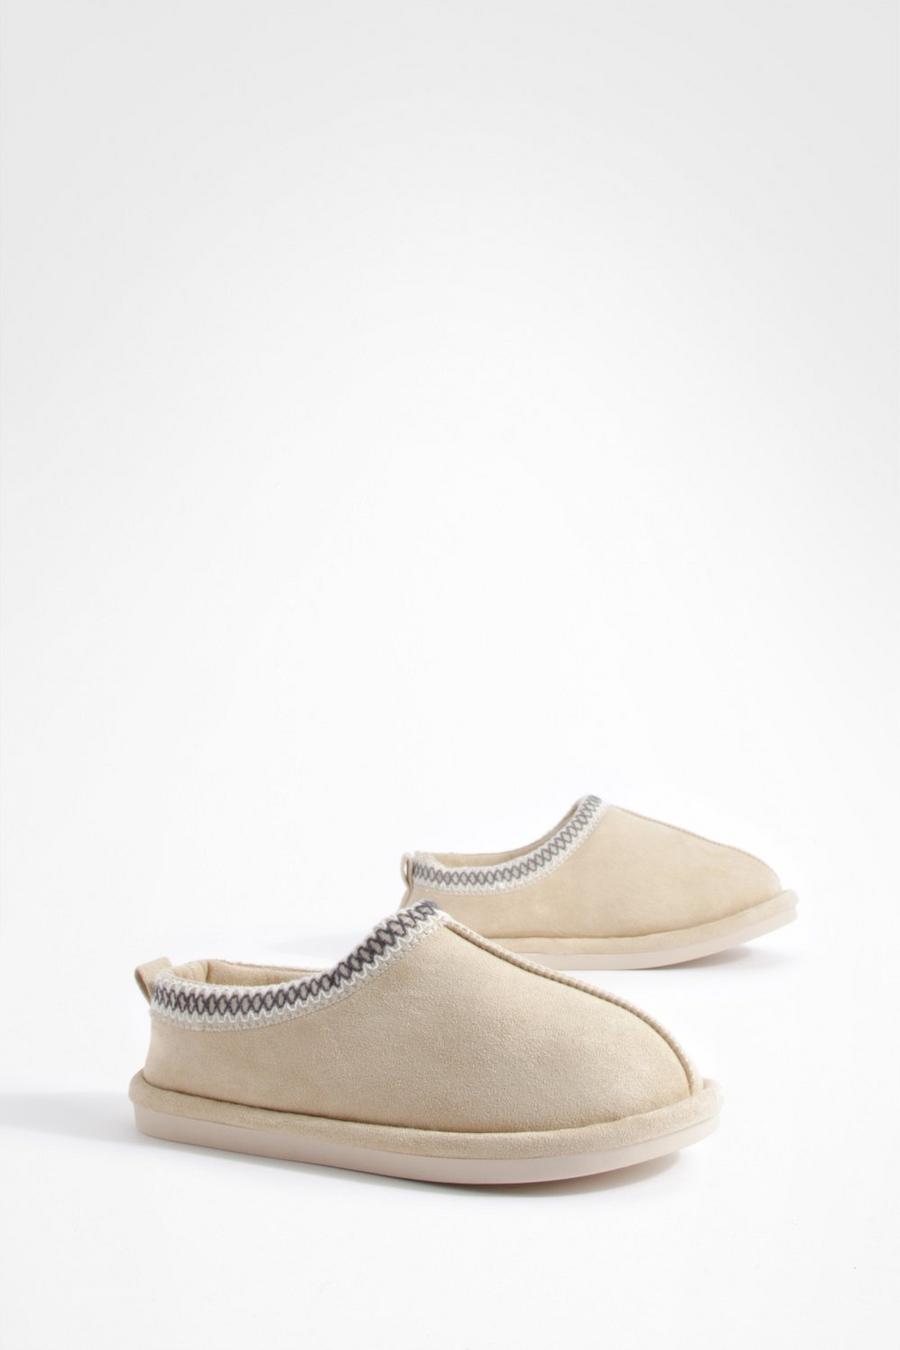 Beige Embroidered Cosy Slip On Mules